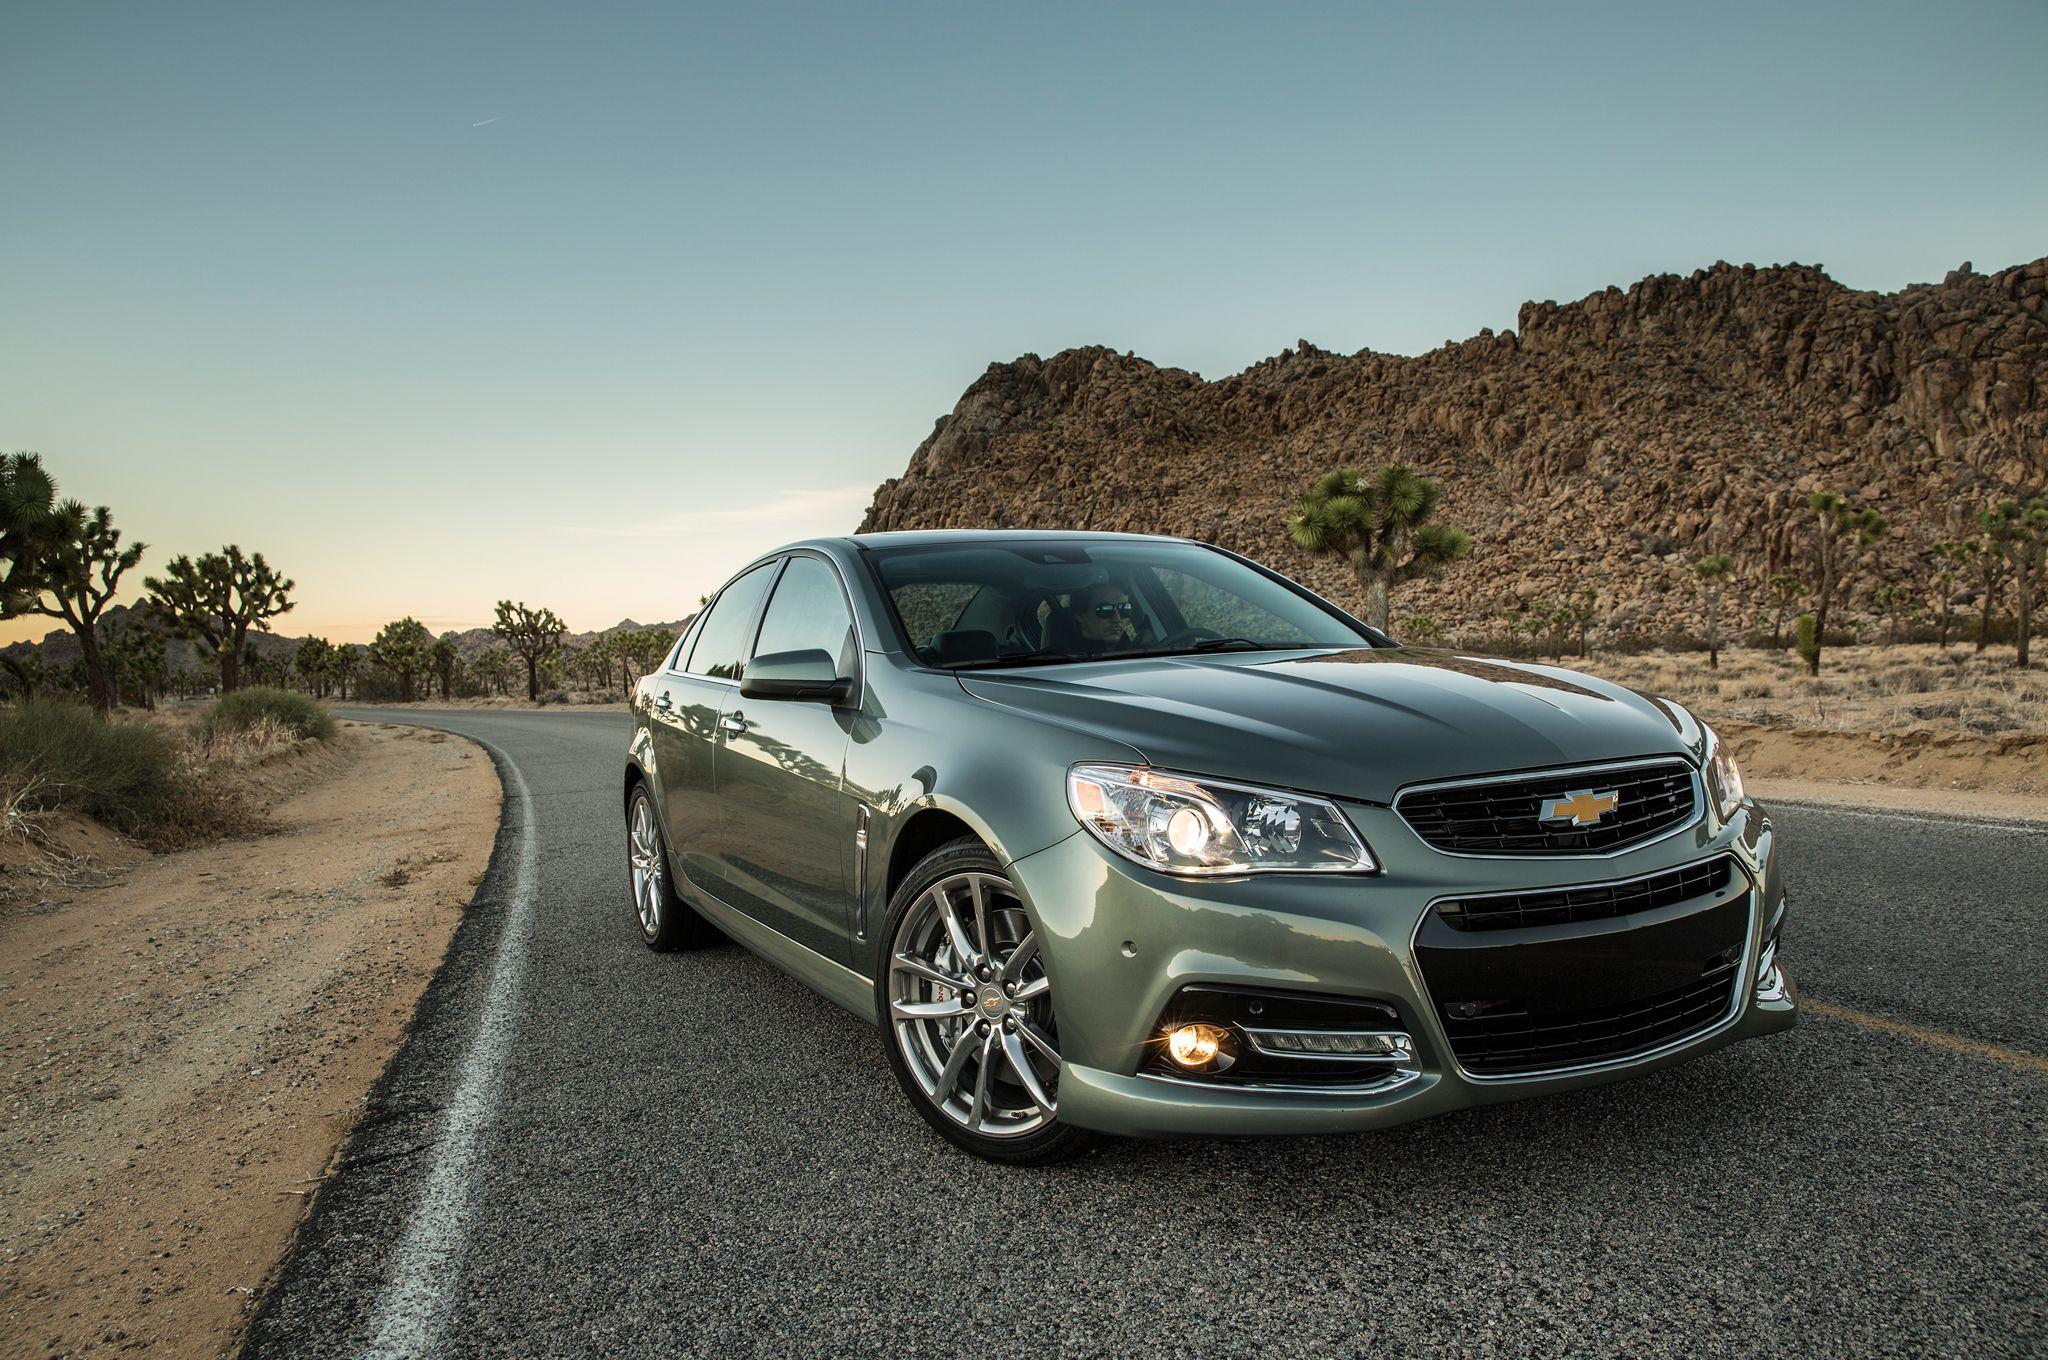 Chevrolet Ss Photo and Wallpaper